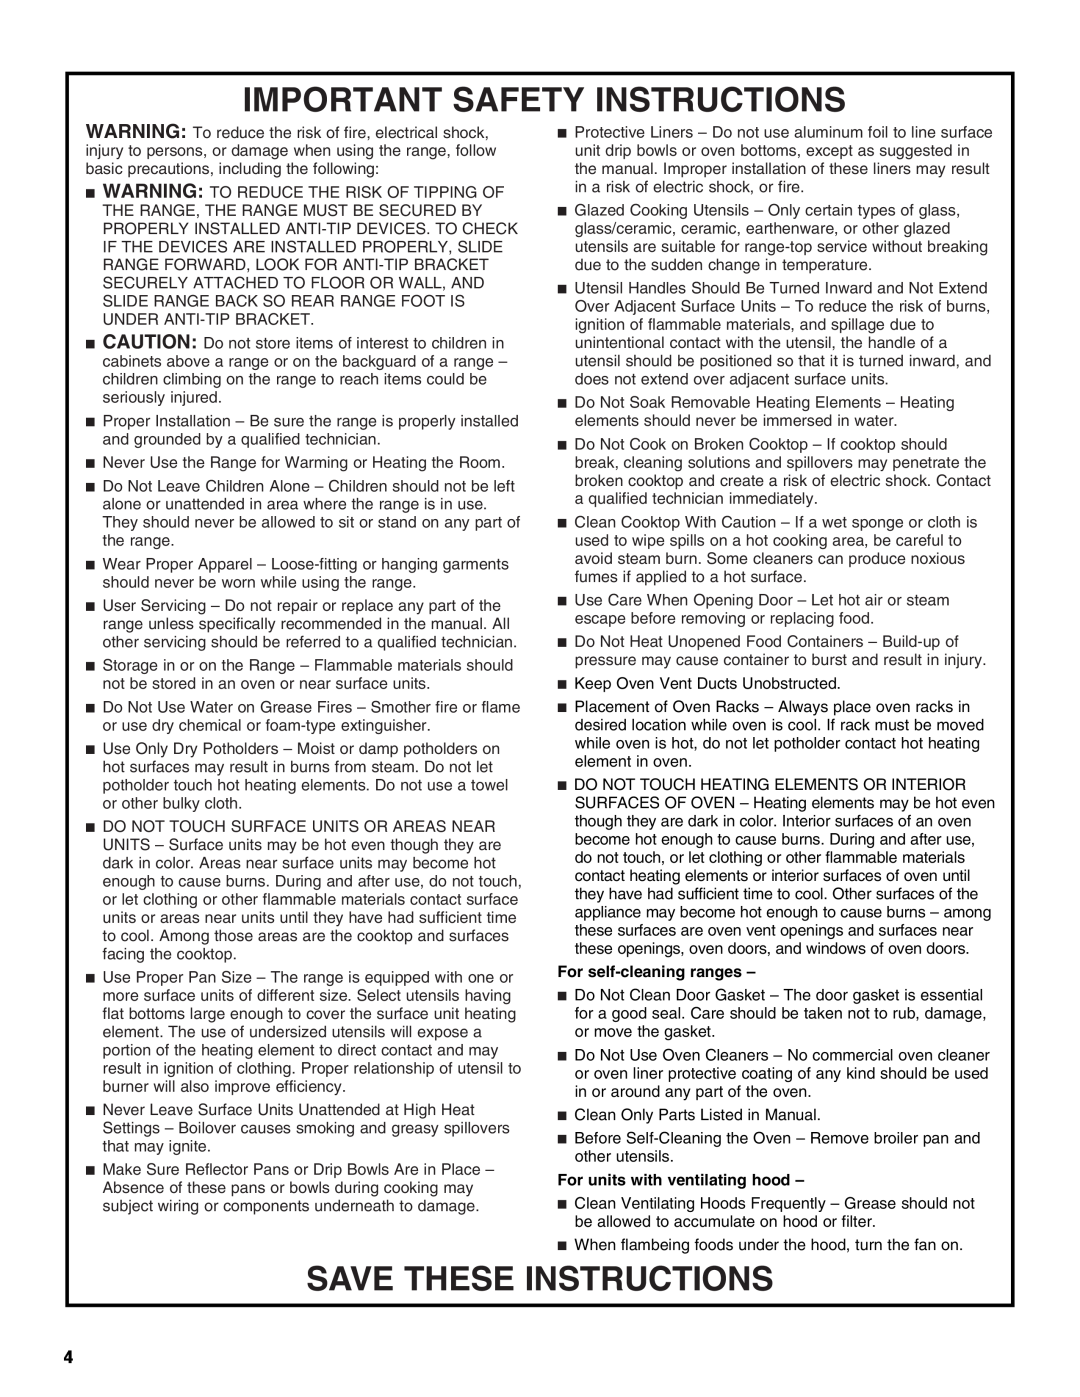 Whirlpool GY397LXUS manual Important Safety Instructions, Save These Instructions, For self-cleaningranges 